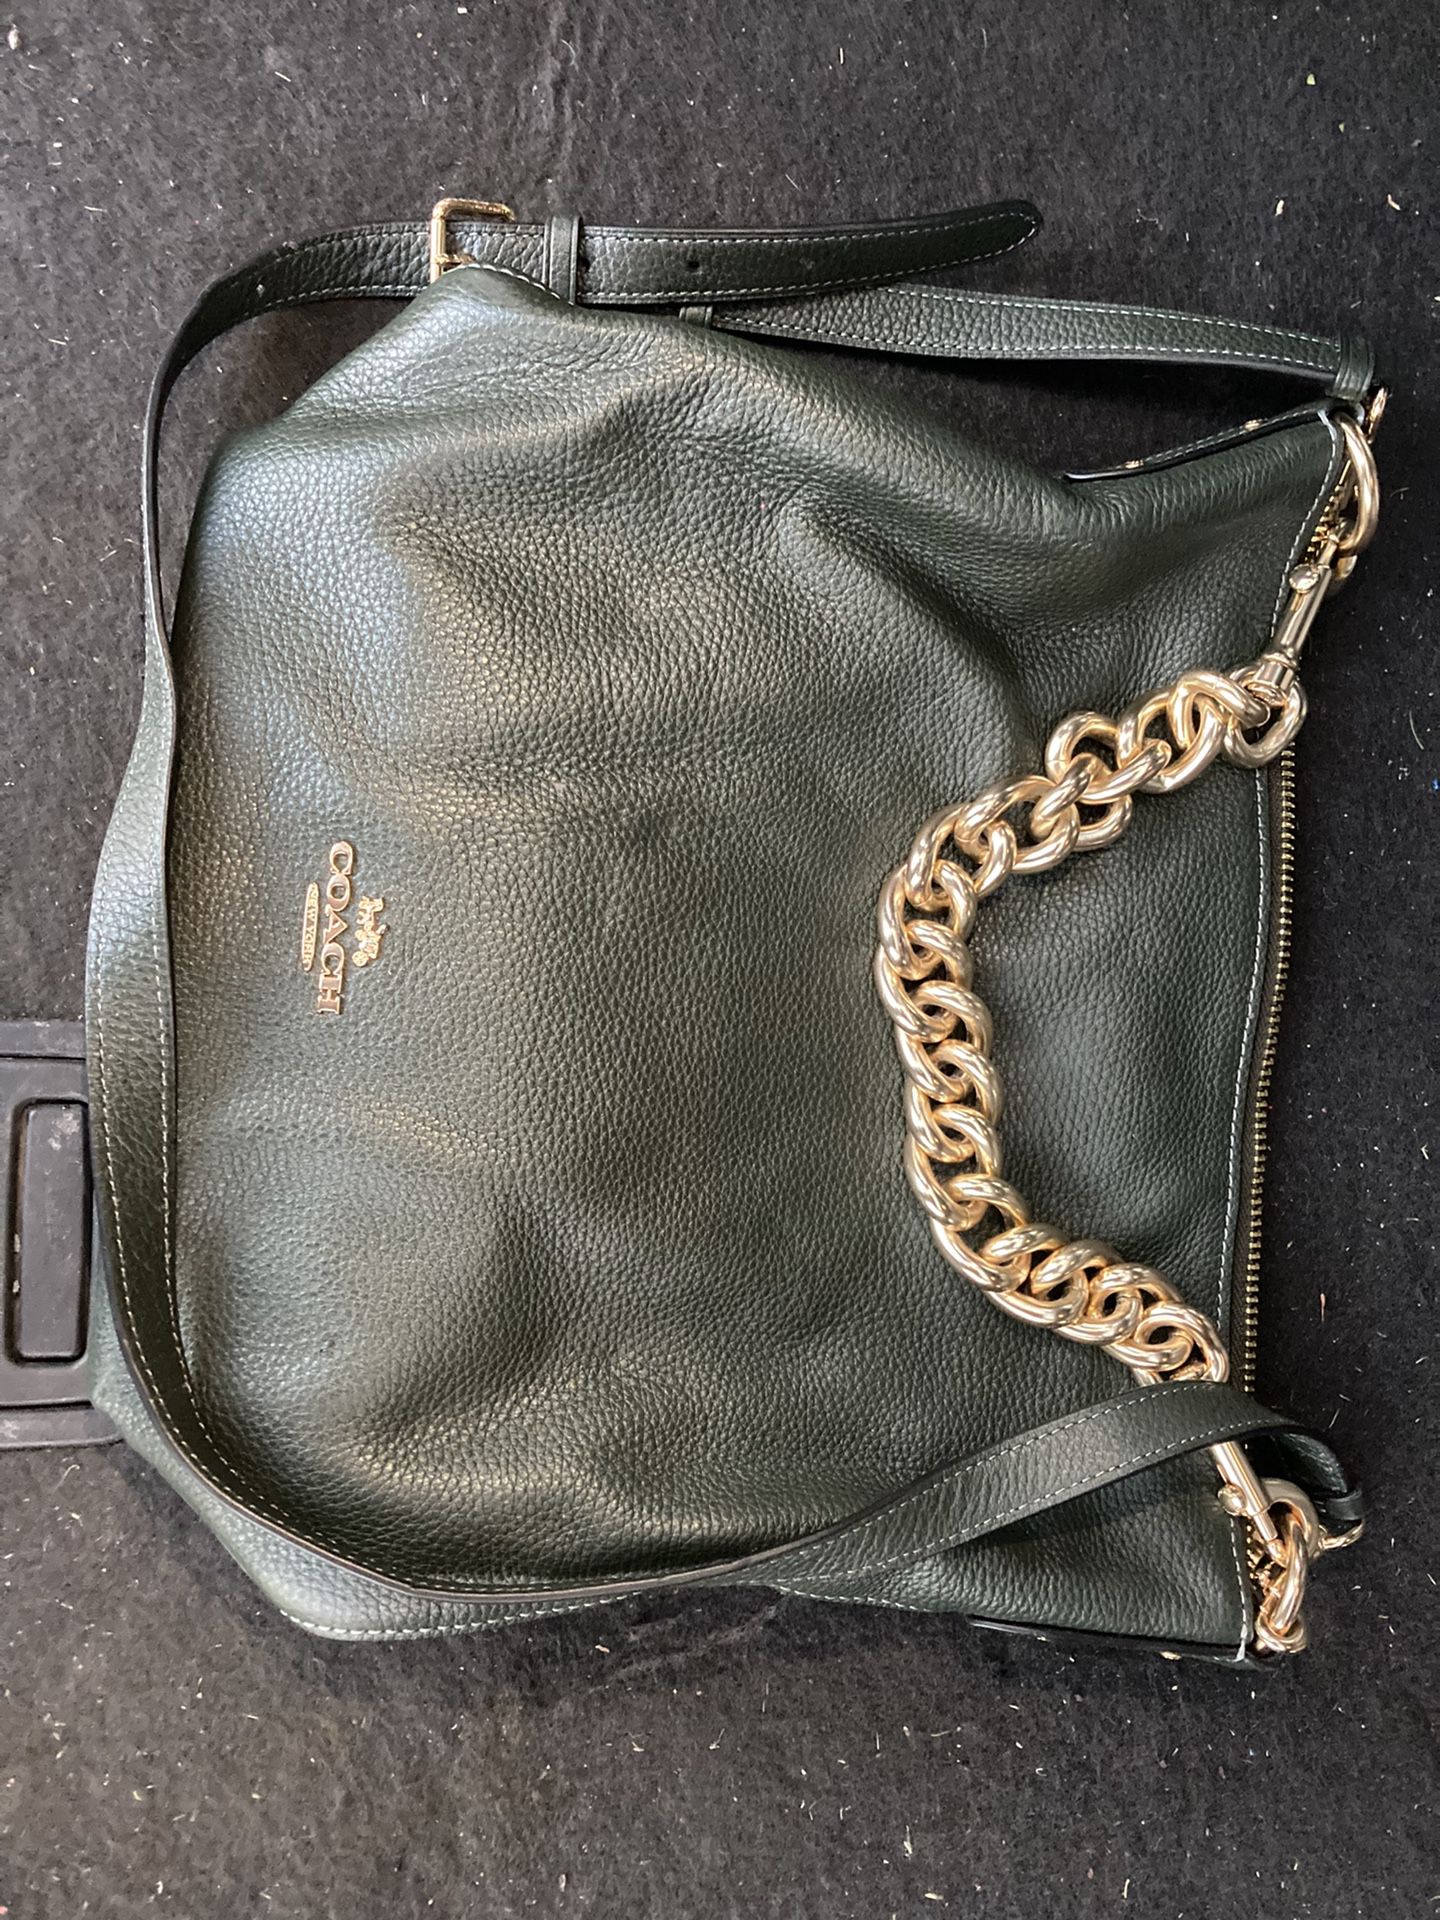 Coach Bag Gold / Ivy Abby Duffle F45066 gold chain, Green Soft Leather